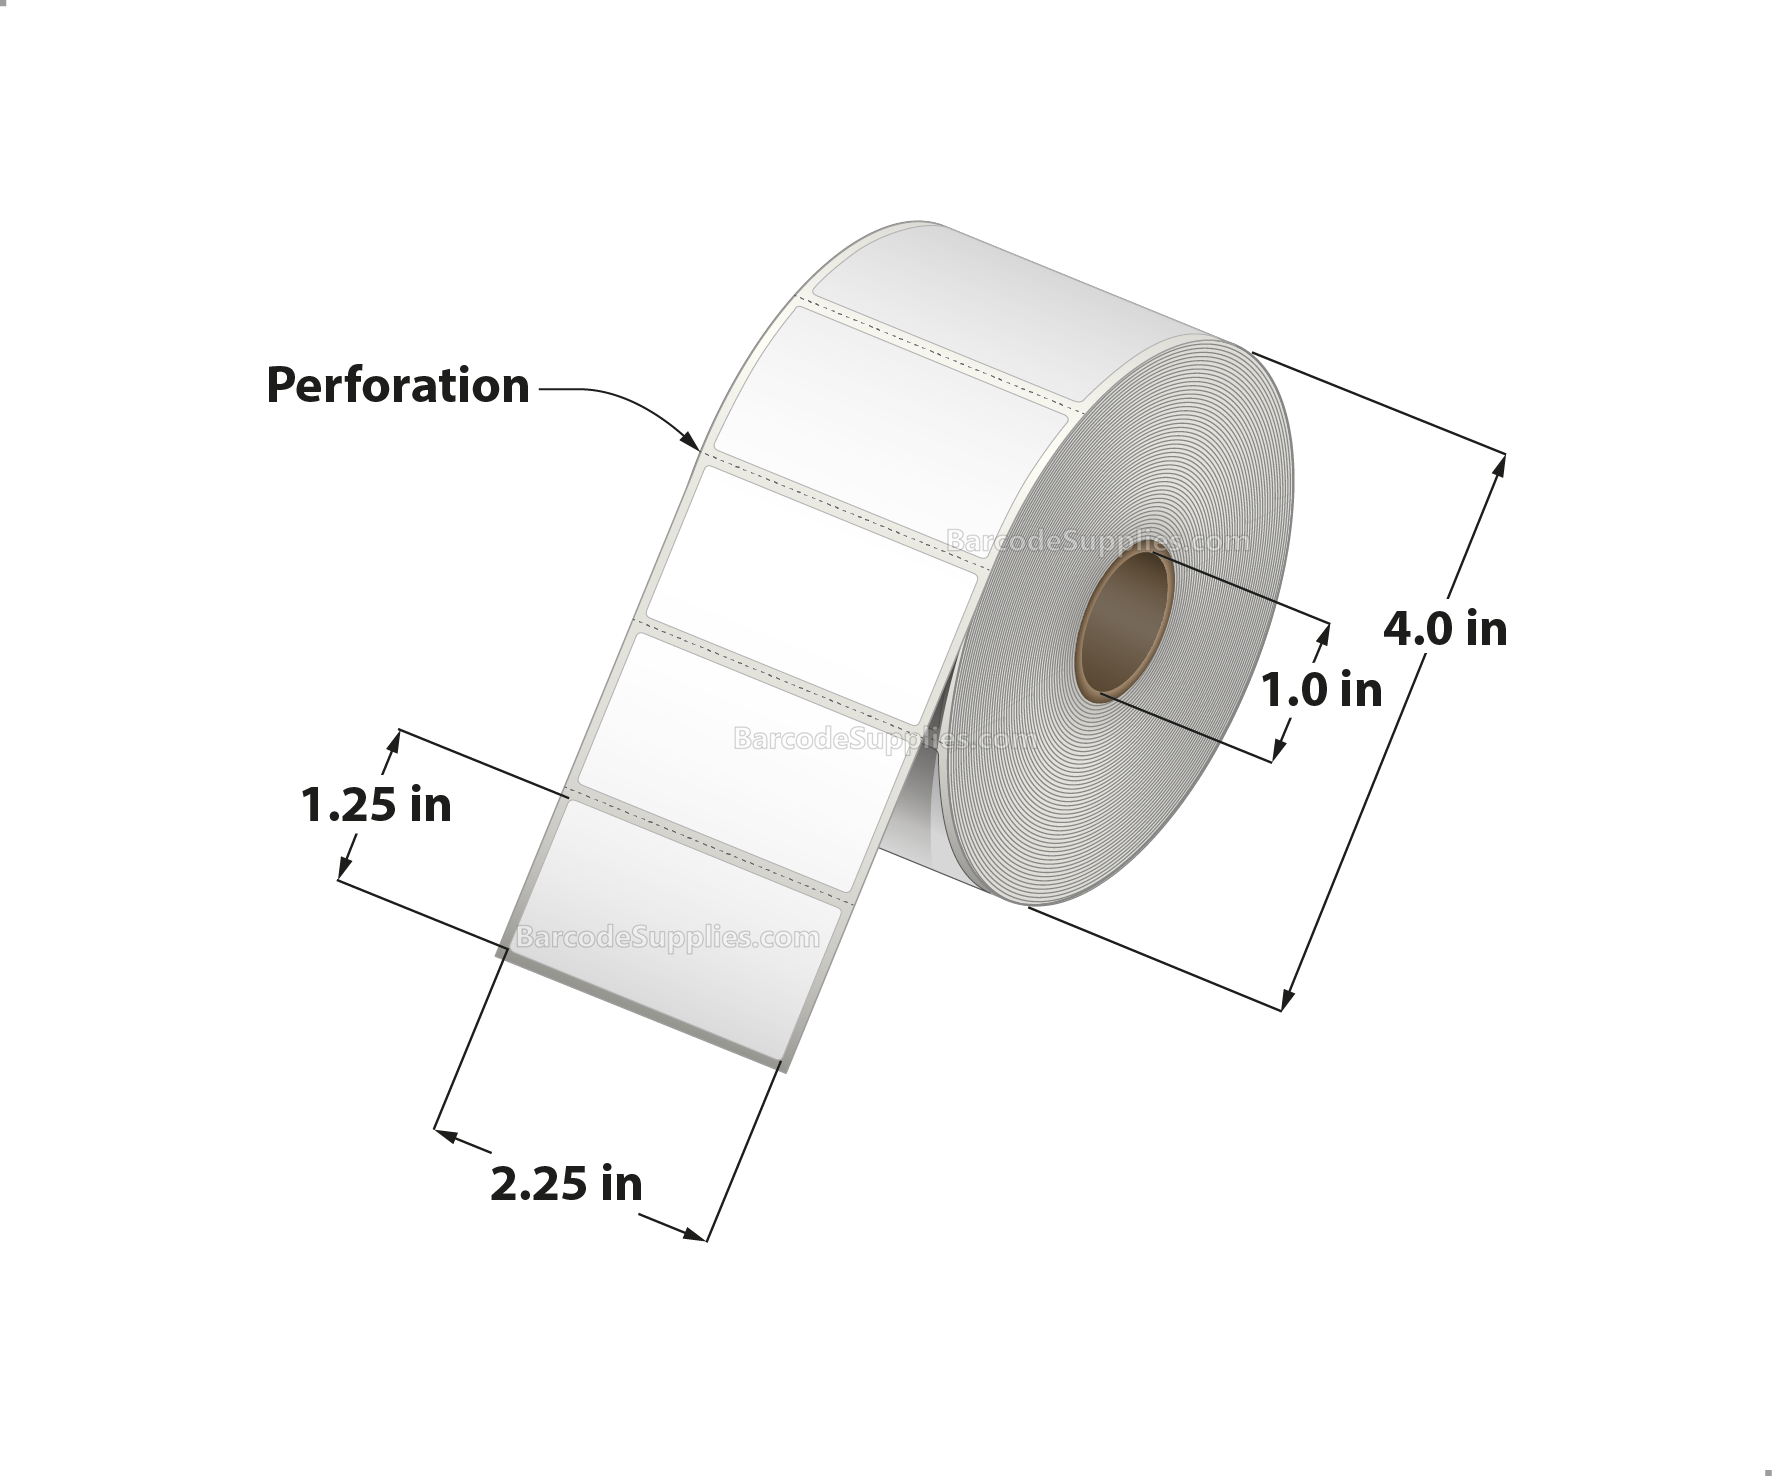 2.25 x 1.25 Direct Thermal White Labels With Permanent Acrylic Adhesive - Perforated - 1135 Labels Per Roll - Carton Of 4 Rolls - 4540 Labels Total - MPN: DT225125-14PDT